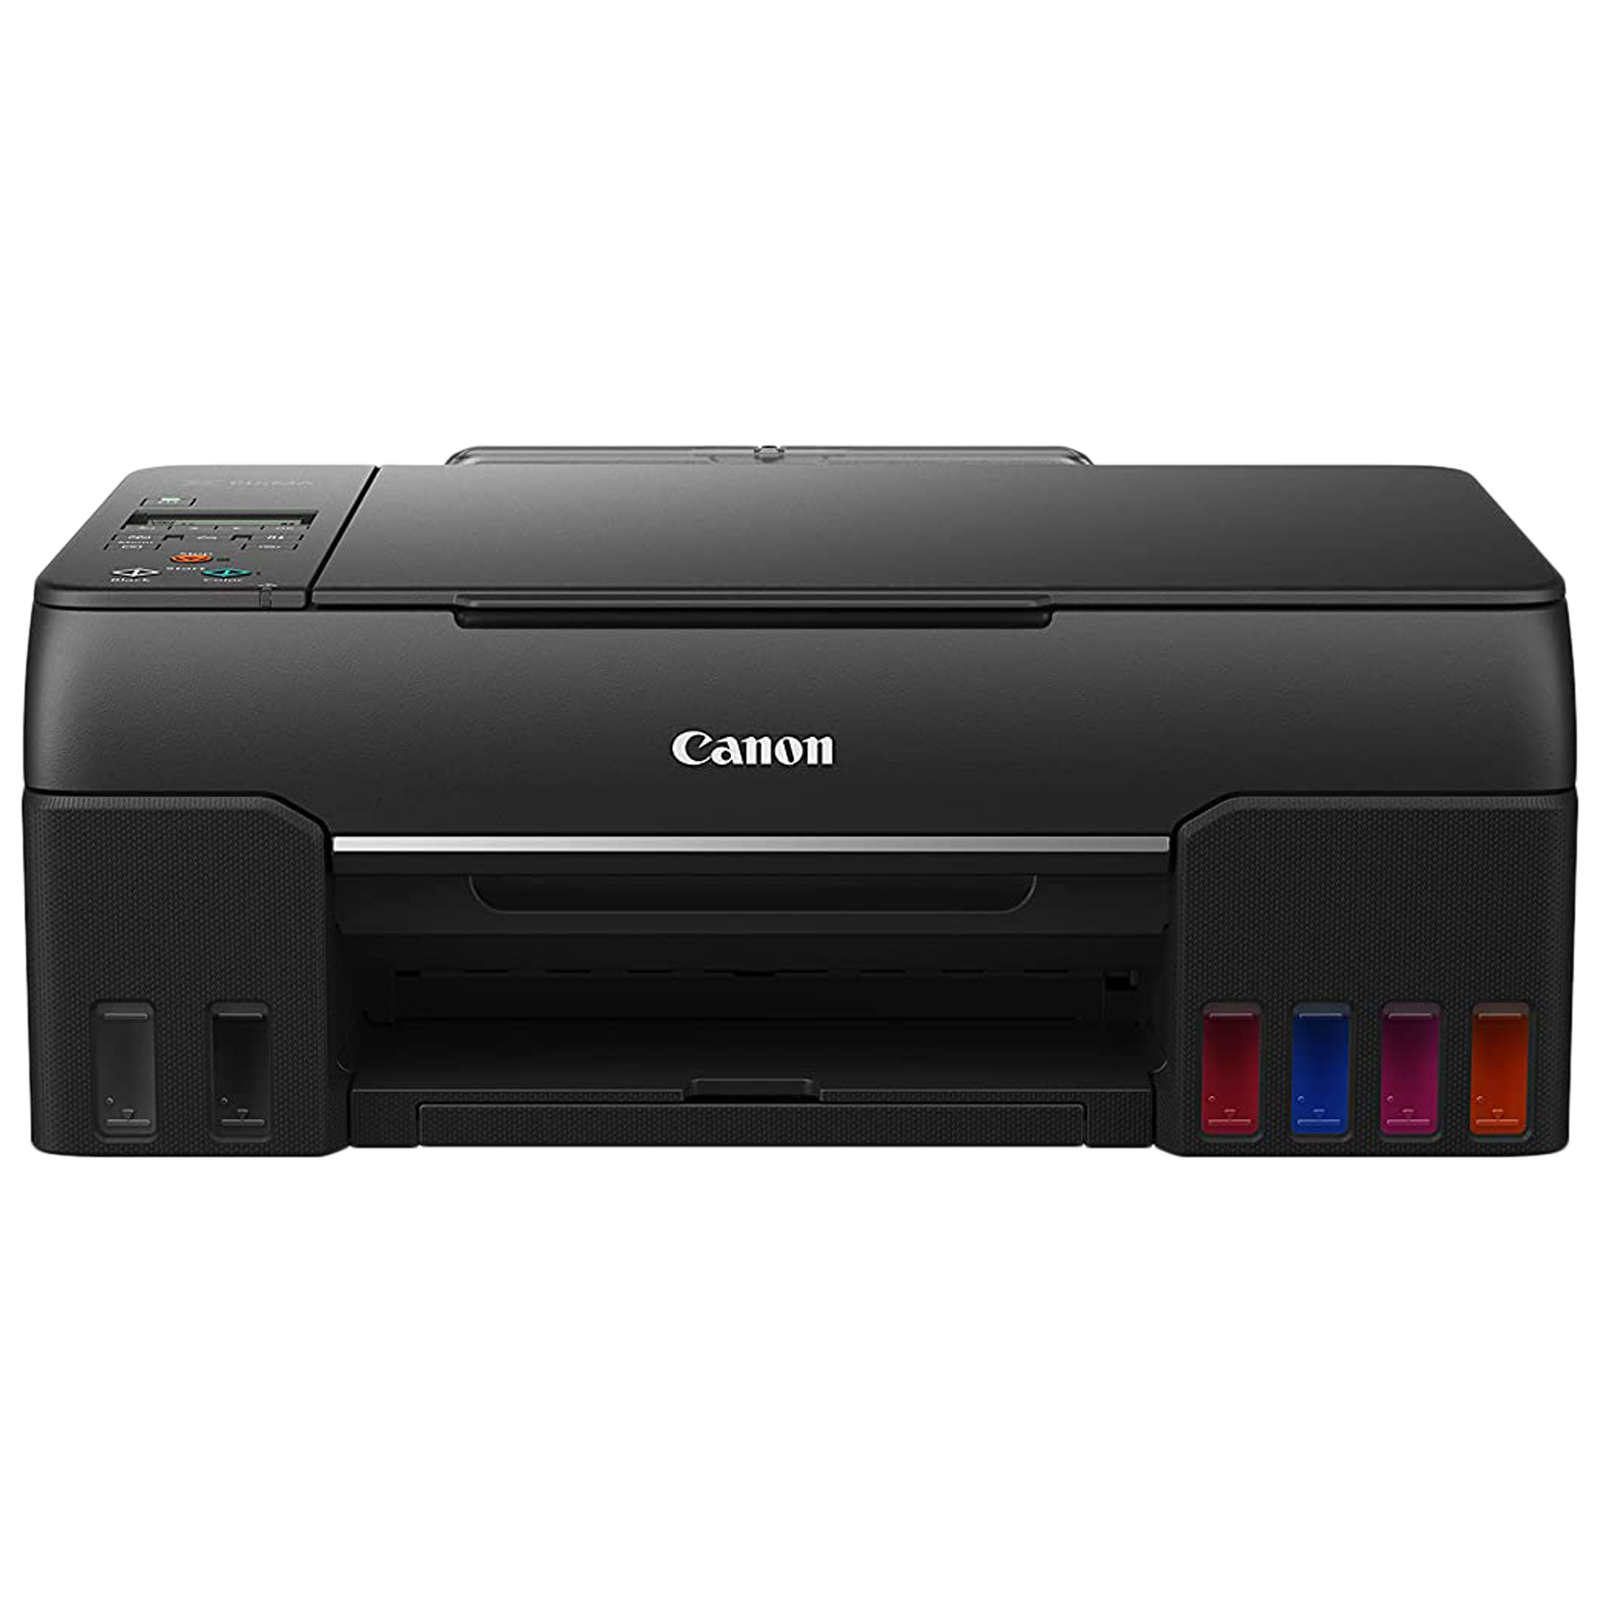 Canon PIXMA Wireless Color All-in-One Ink Tank Printer (4800 x 1200 dpi Printing Resolution, G670, Black)_1